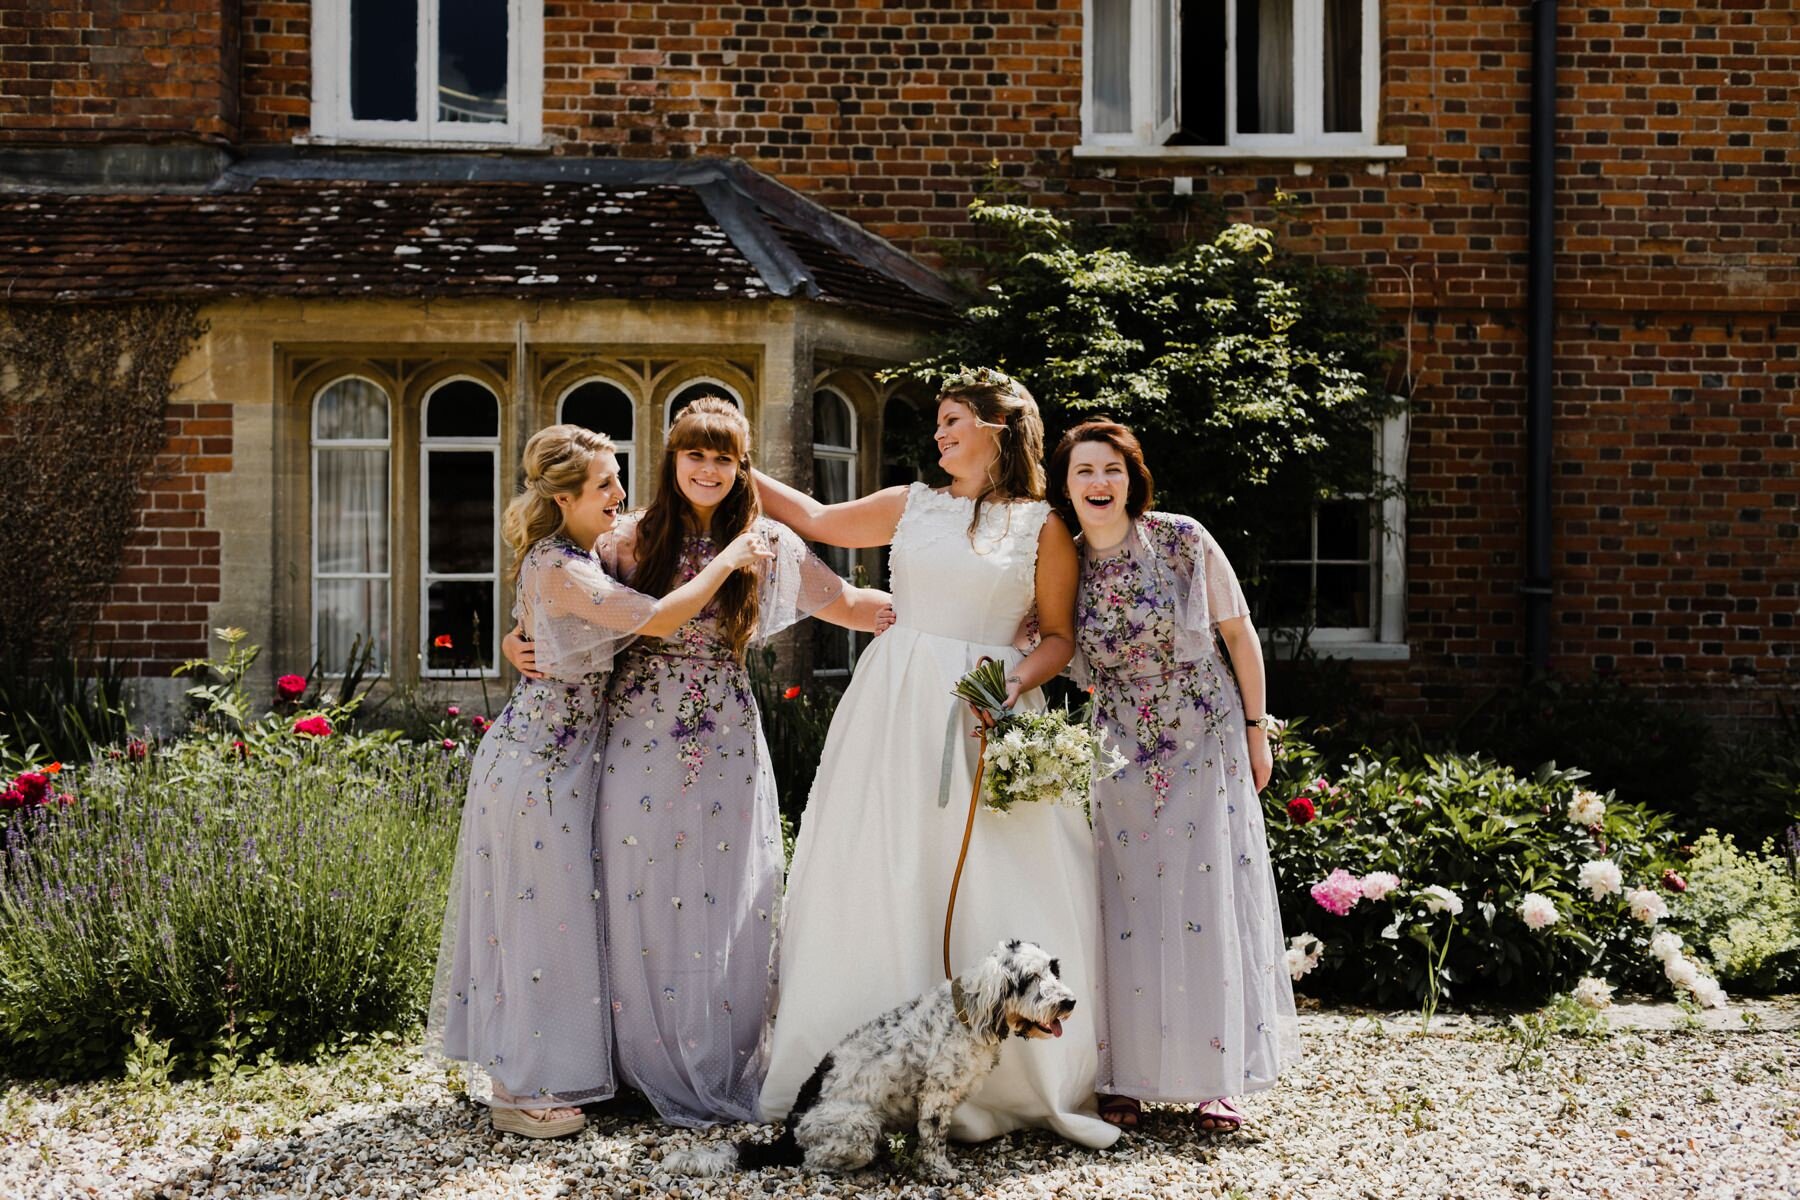 Bride and her bridesmaids laugh and joke before the wedding ceremony at Kingsettle Stud